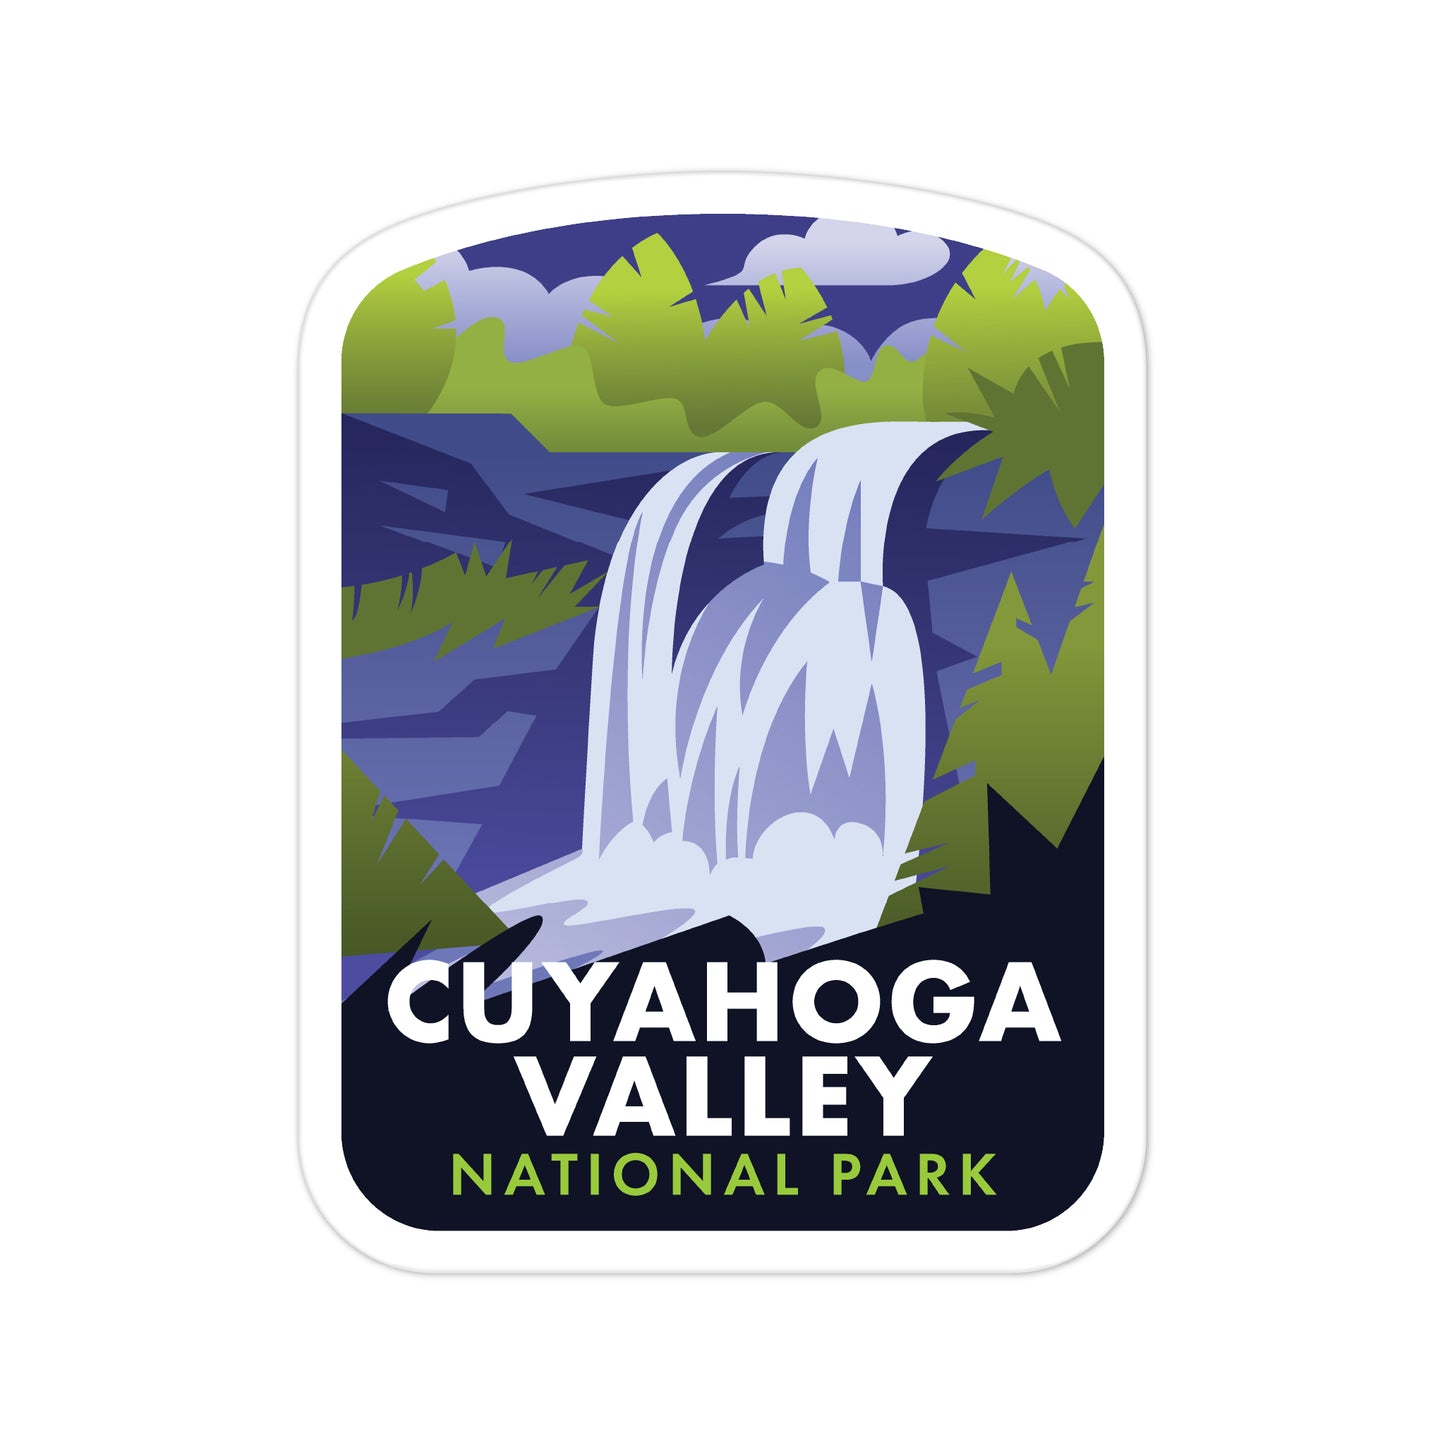 A sticker of Cuyahoga Valley National Park